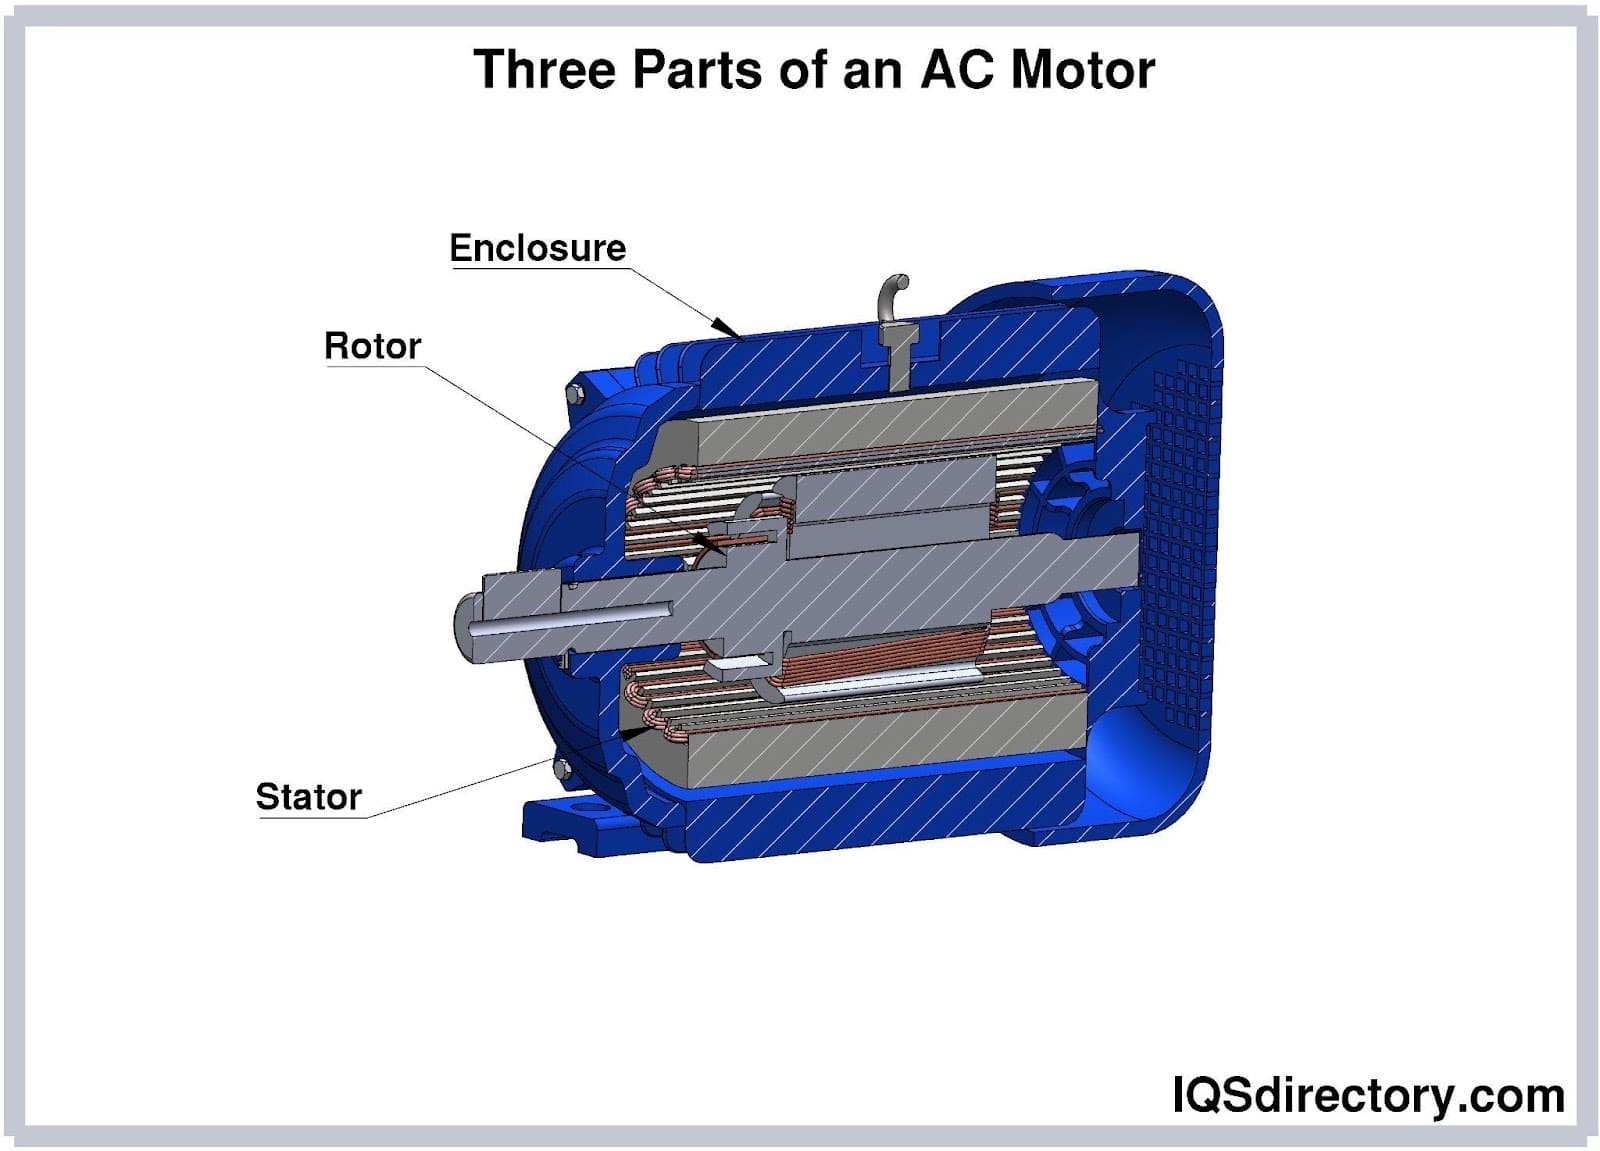 All About Induction Motors - What They Are and How They Work